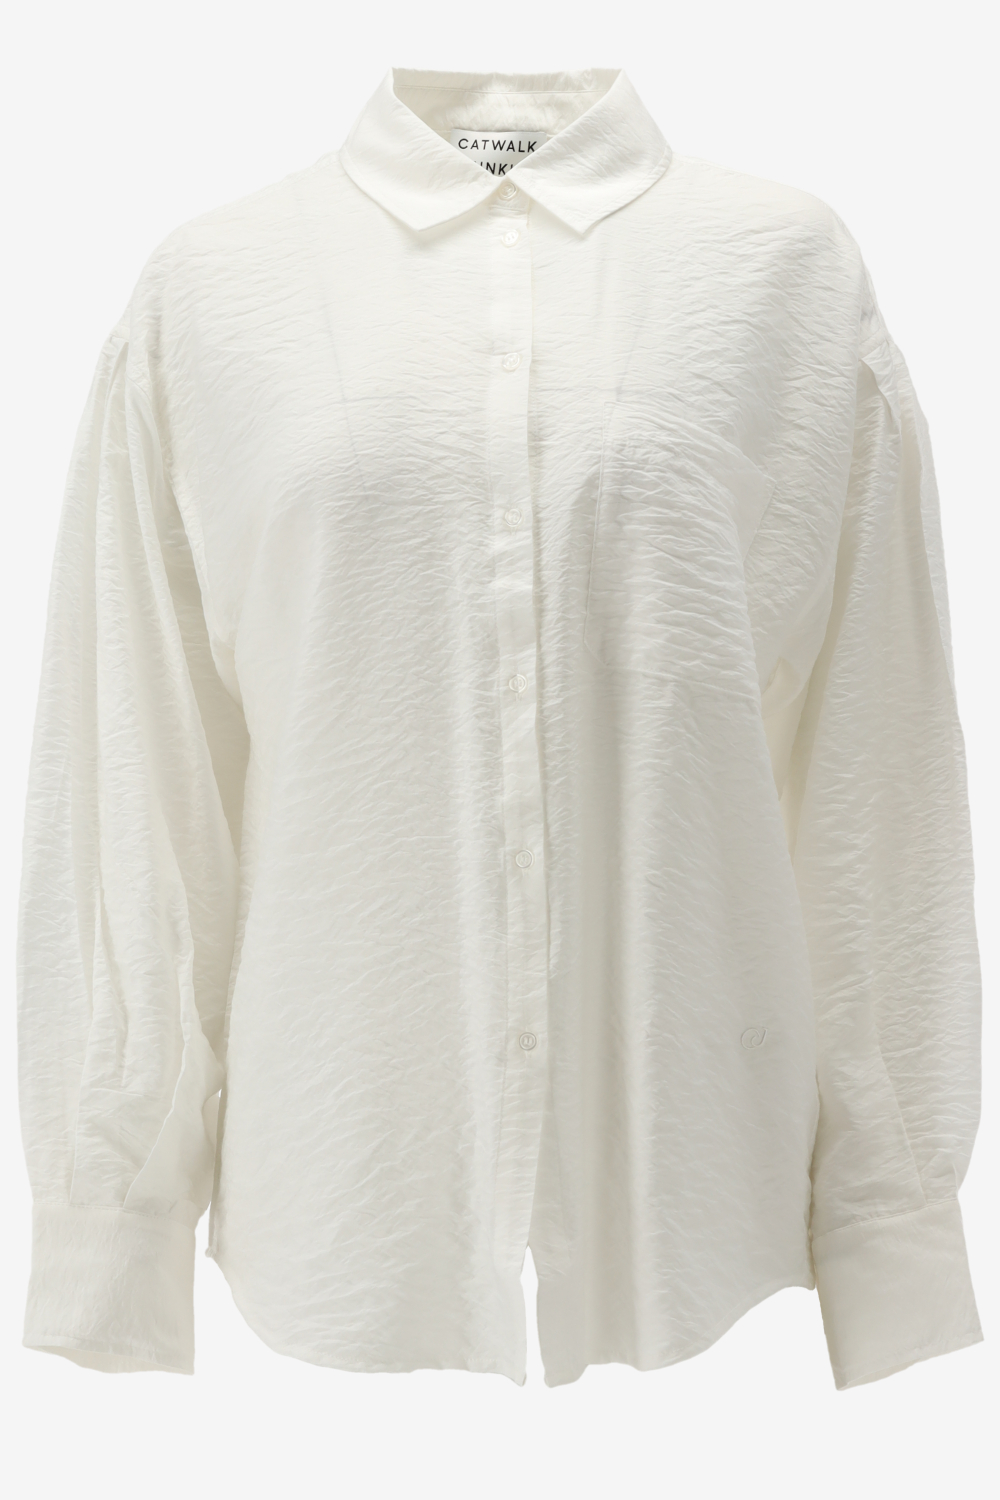 Catwalk Junkie Blouse RELAXED